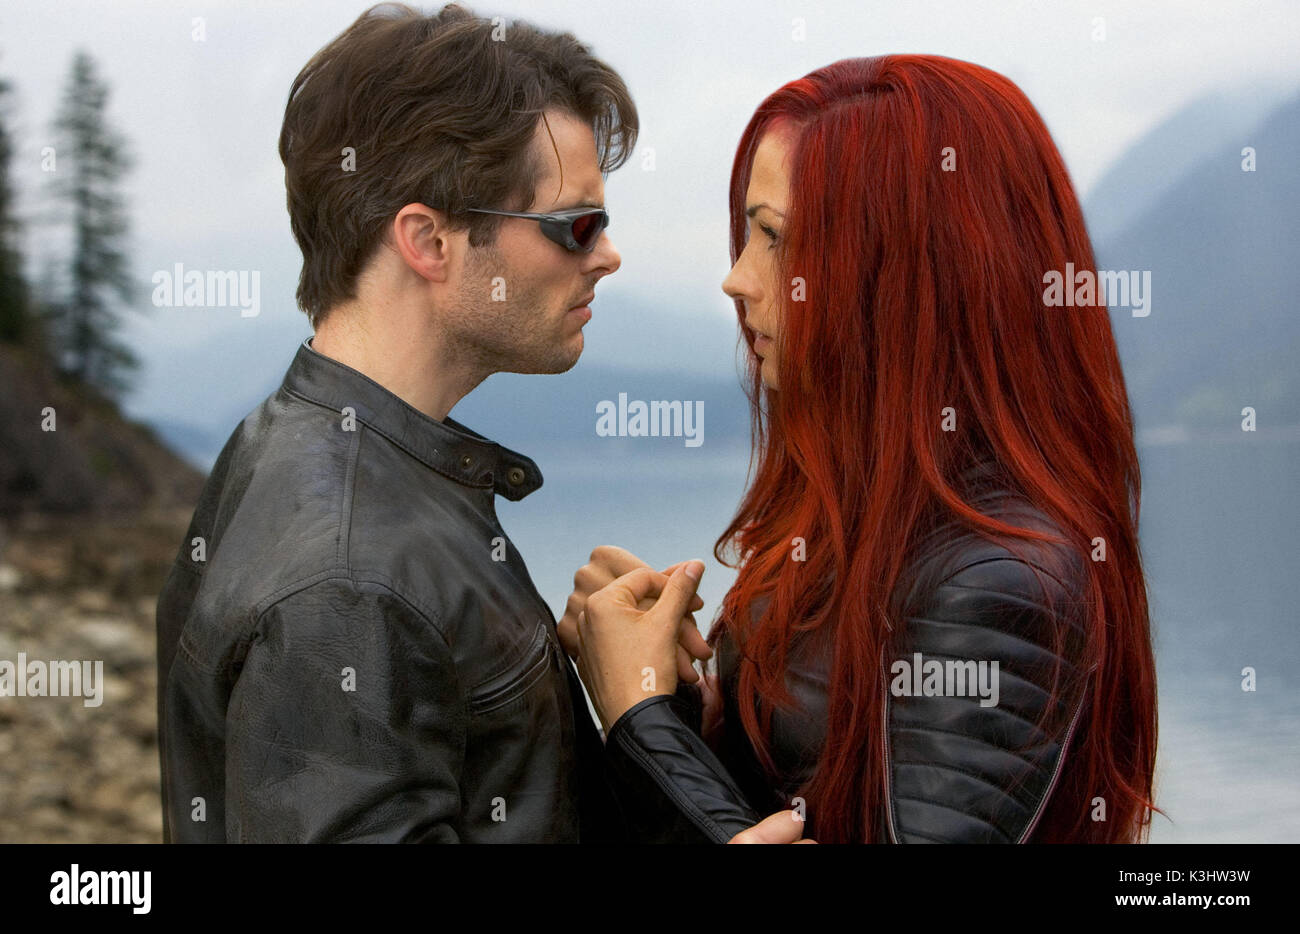 X-MEN: THE LAST STAND Cyclops confronts Jean Grey (Famke Janssen), whom he thought had perished at Alkali Lake.     Date: 2006 Stock Photo